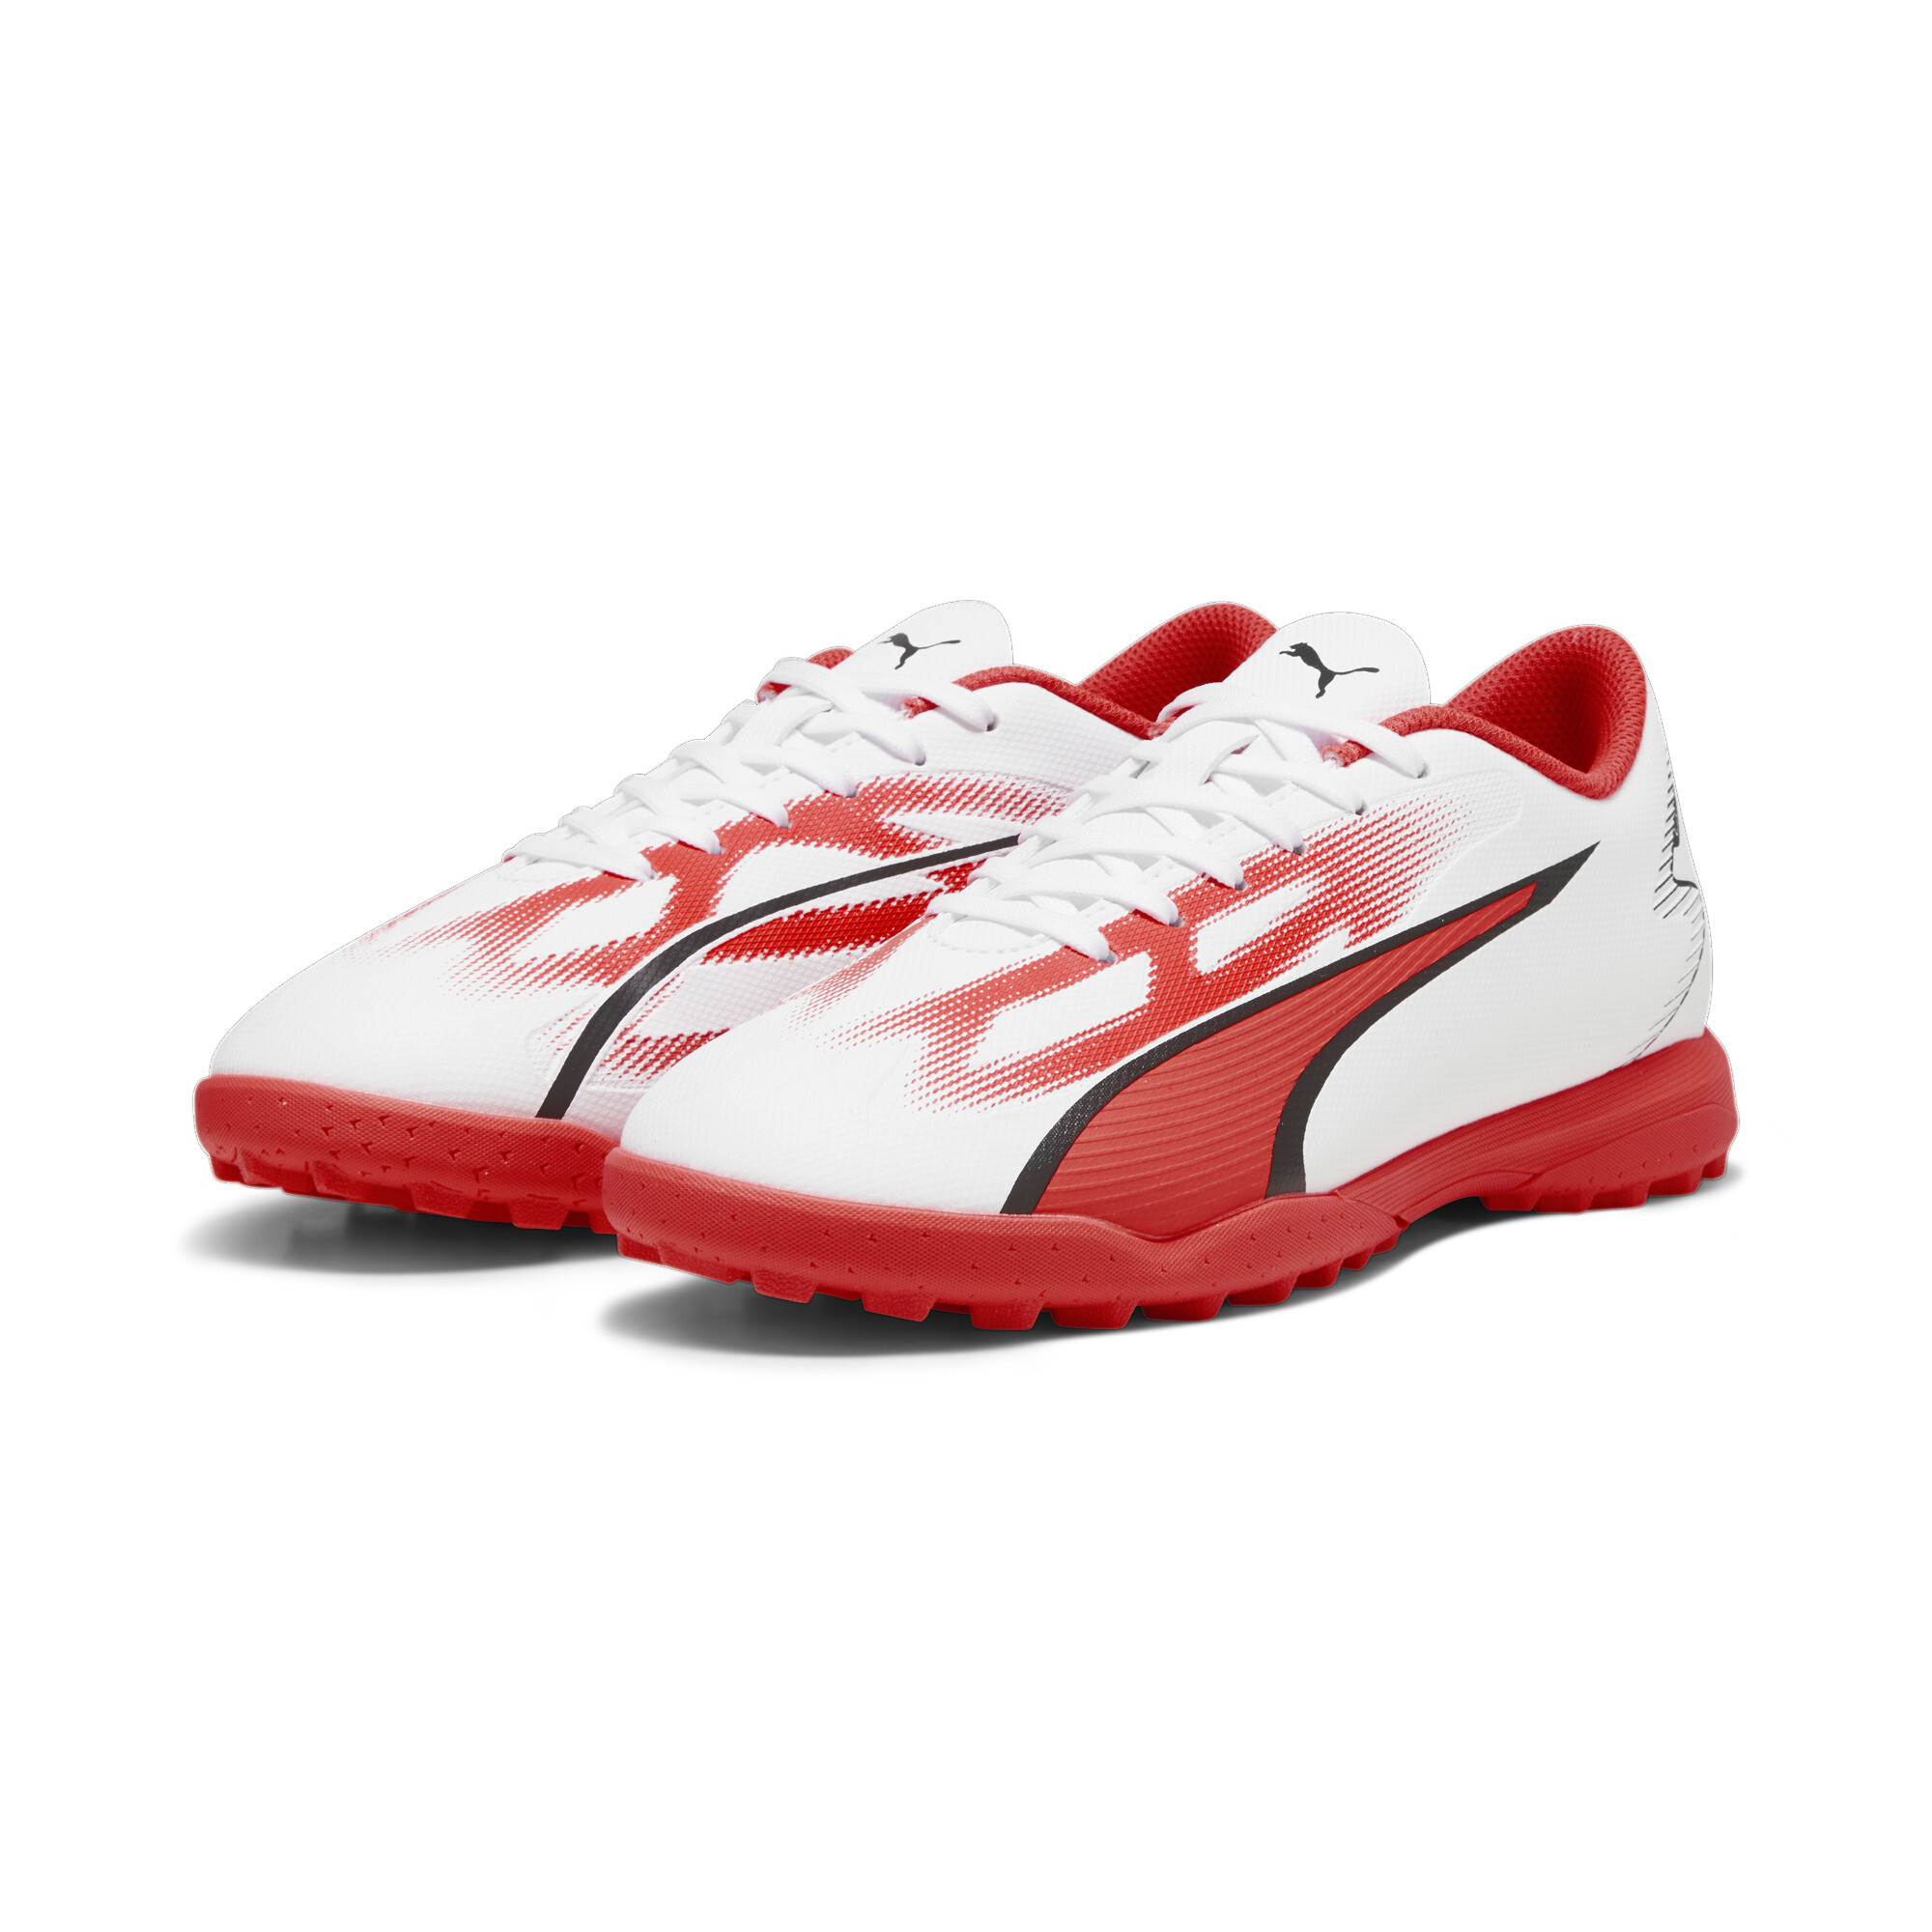 Puma ULTRA PLAY TT Youth Football Boots, White, Size 28, Shoes